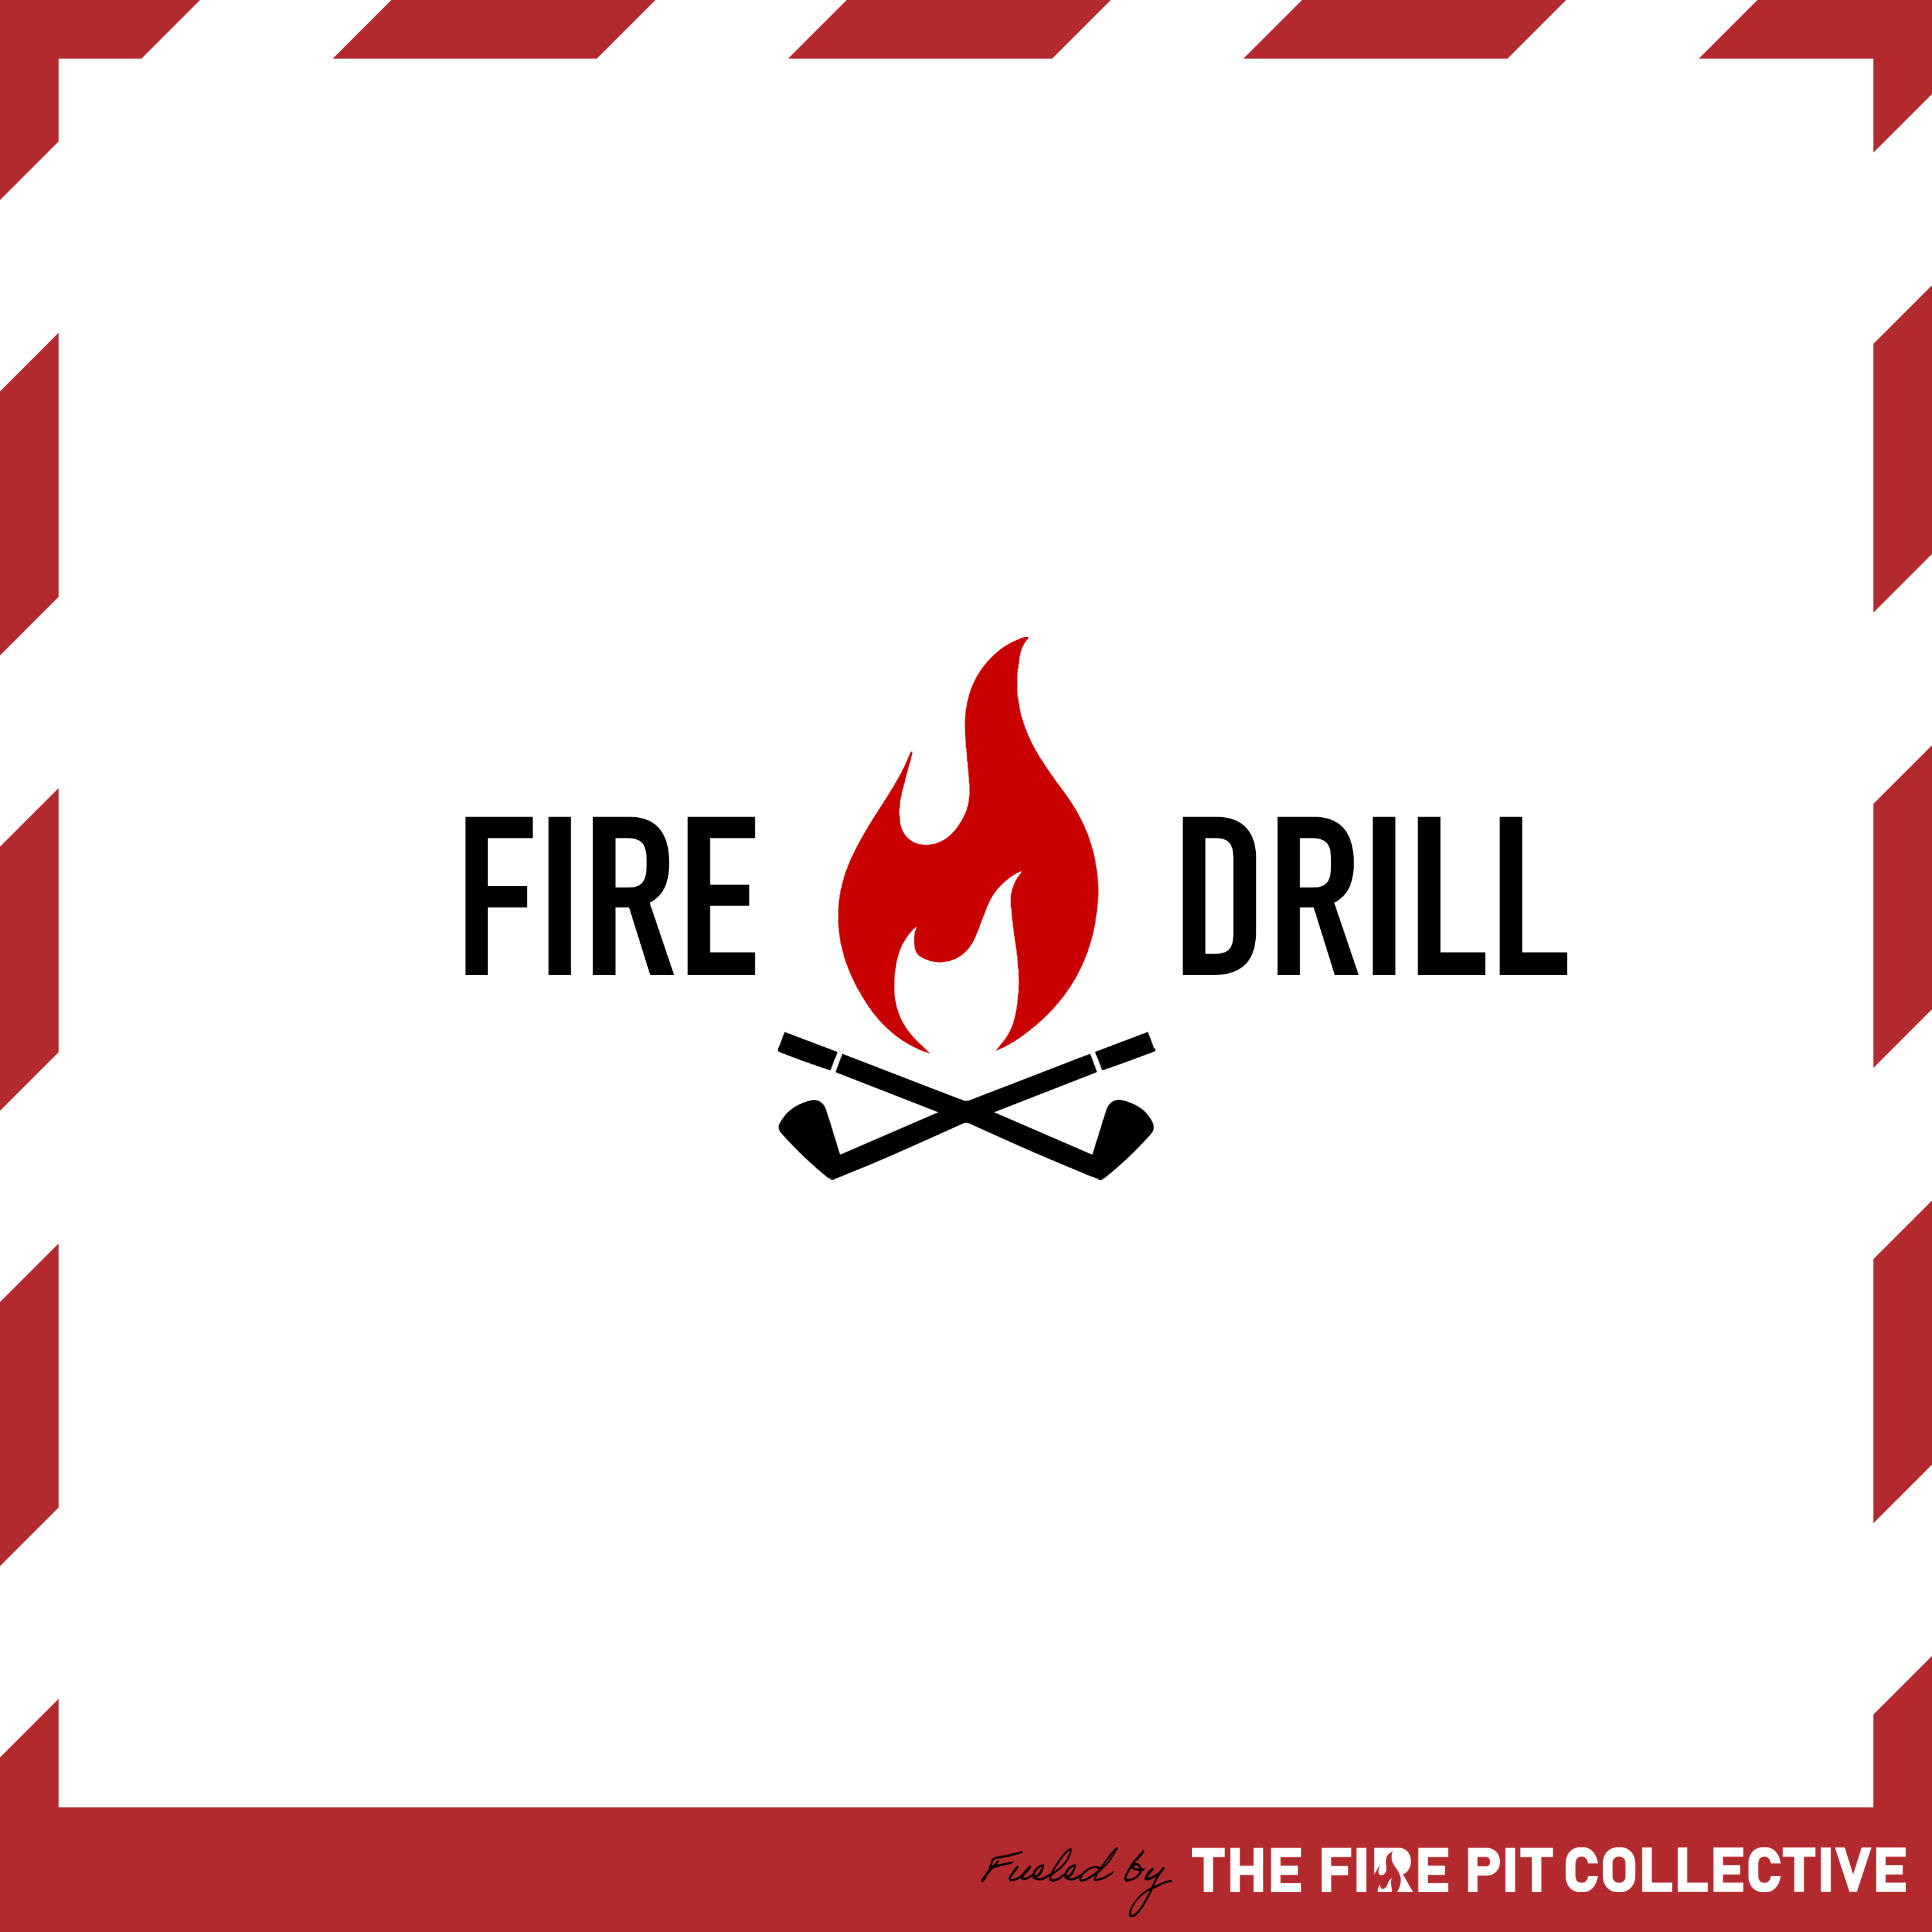 Fire Drill 061: A Day to Reflect